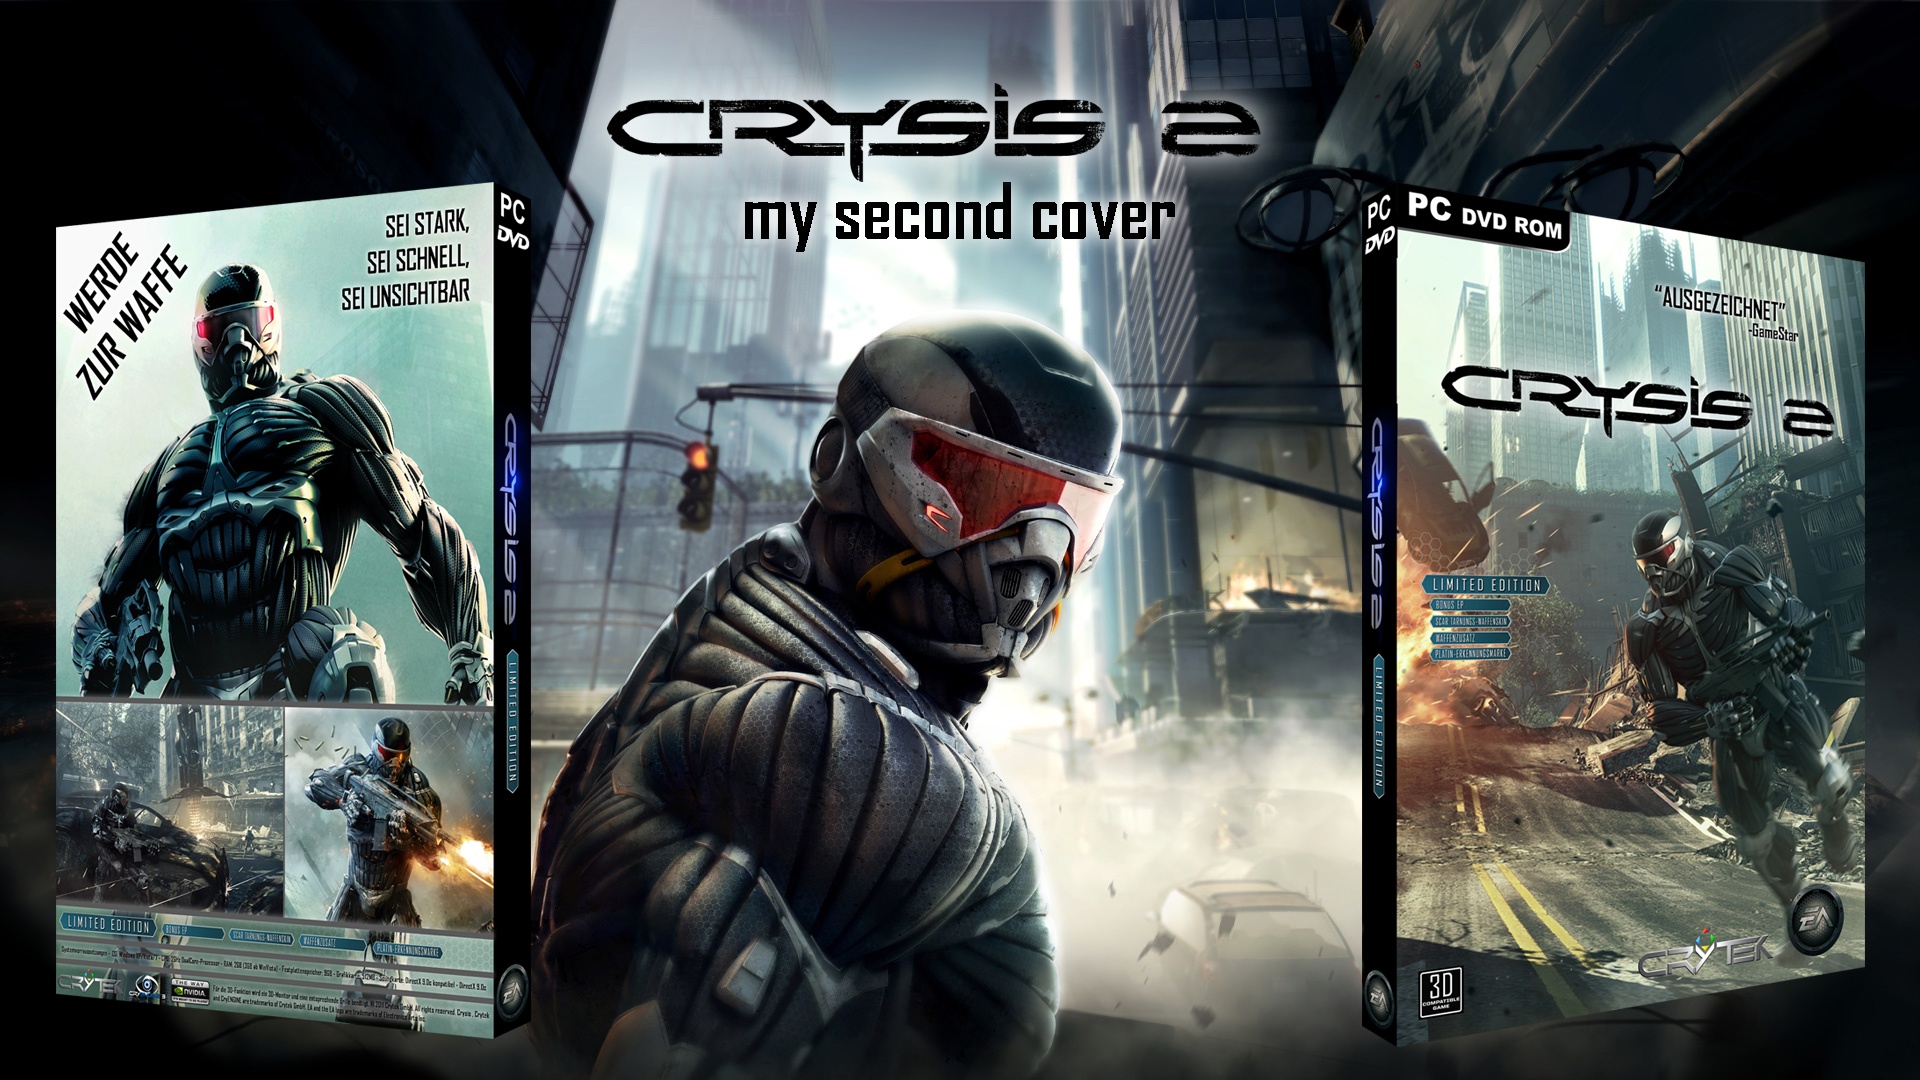 Crysis 2 Limited Edition box cover